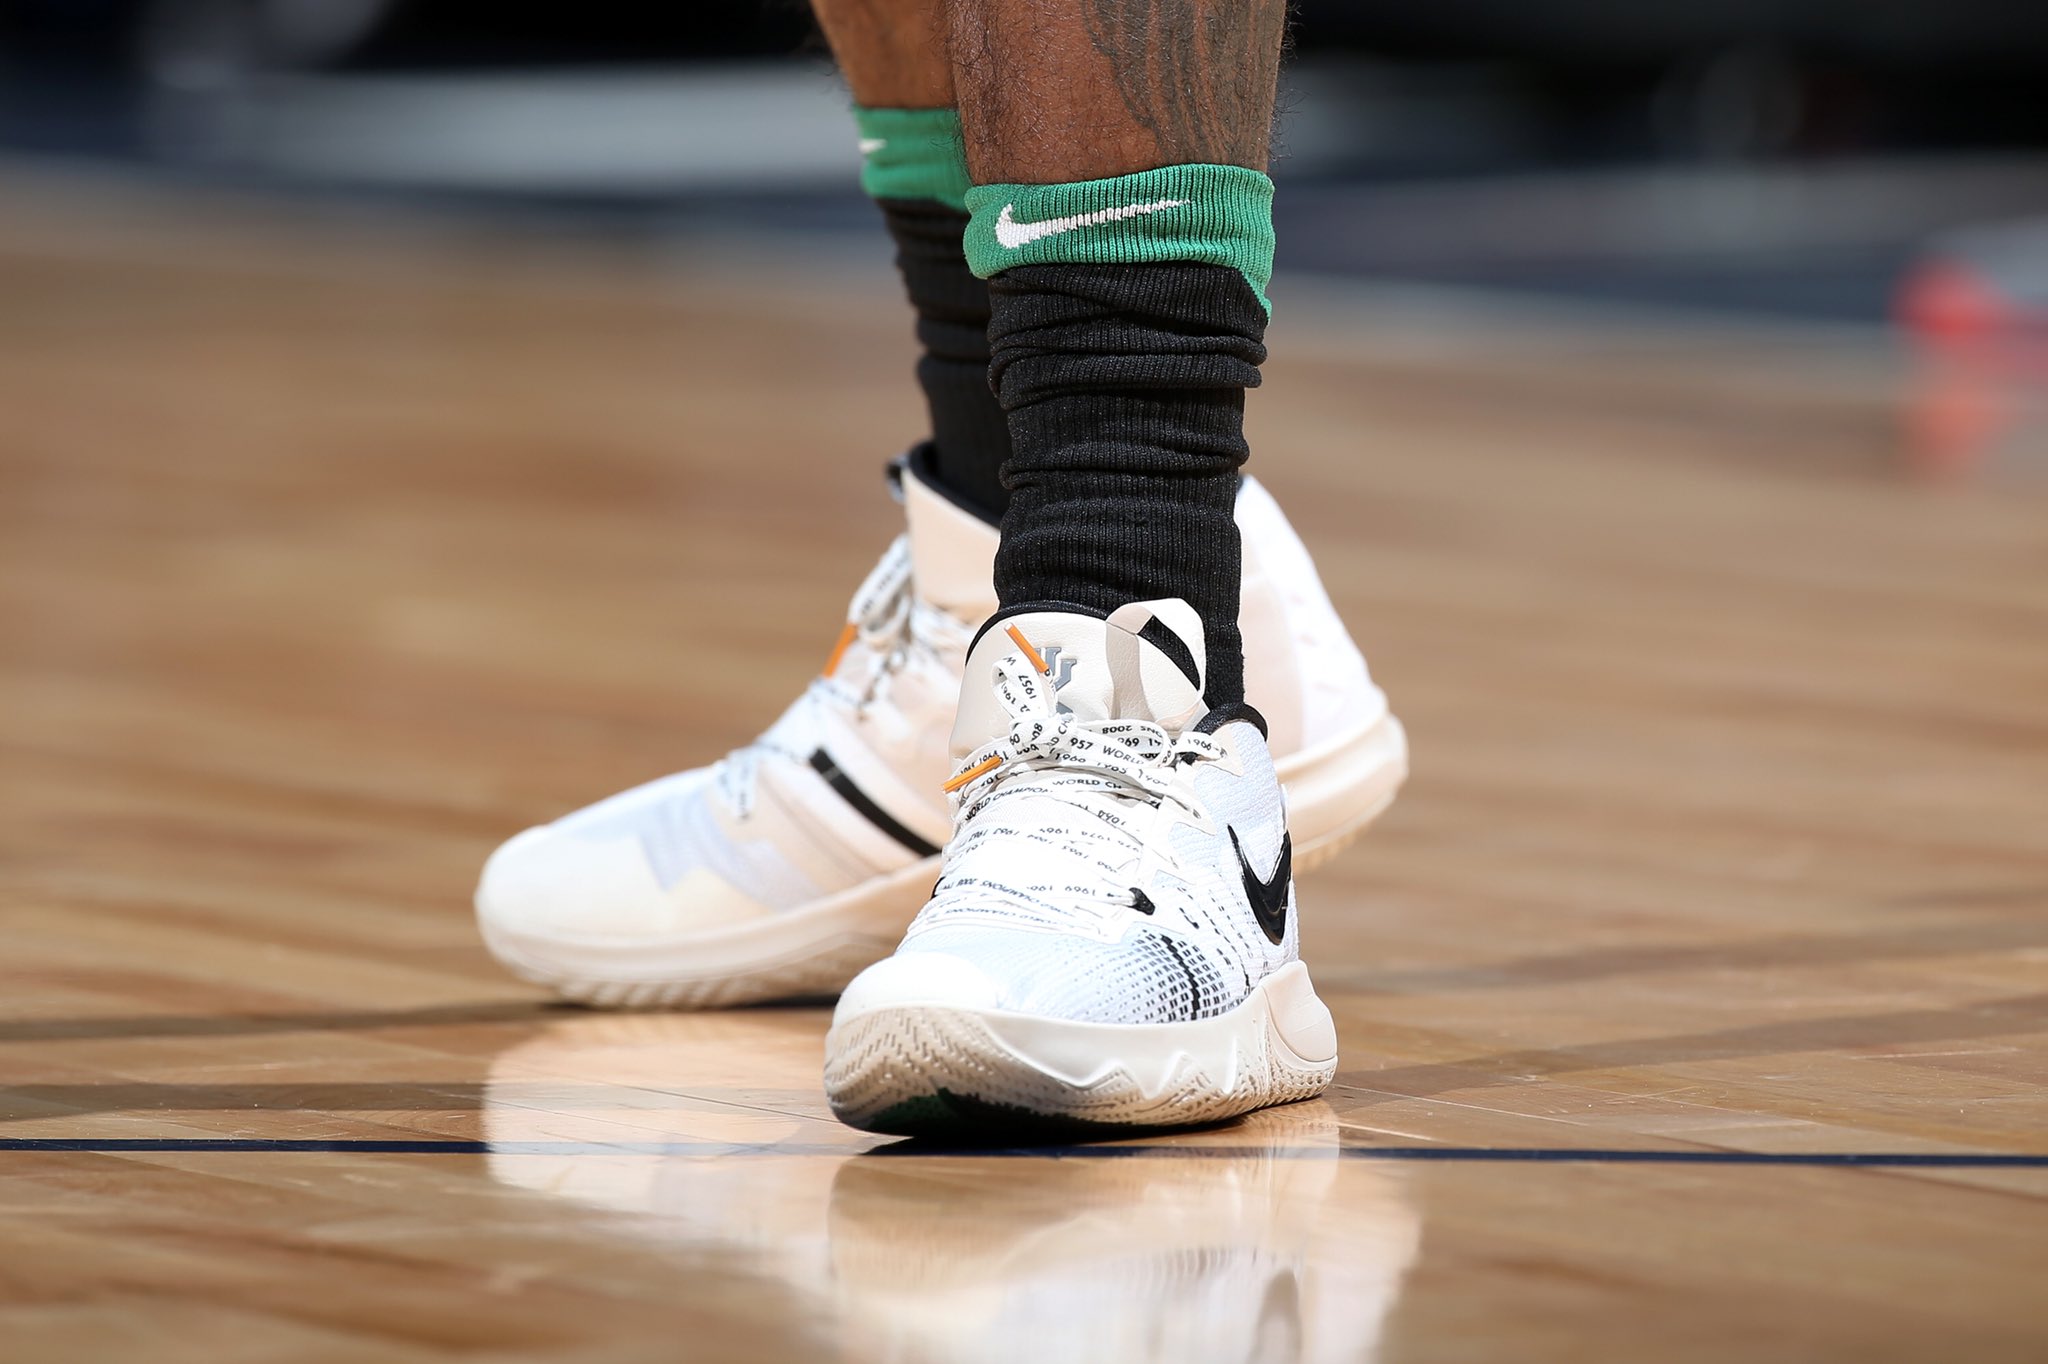 kyrie irving wearing flytrap 2